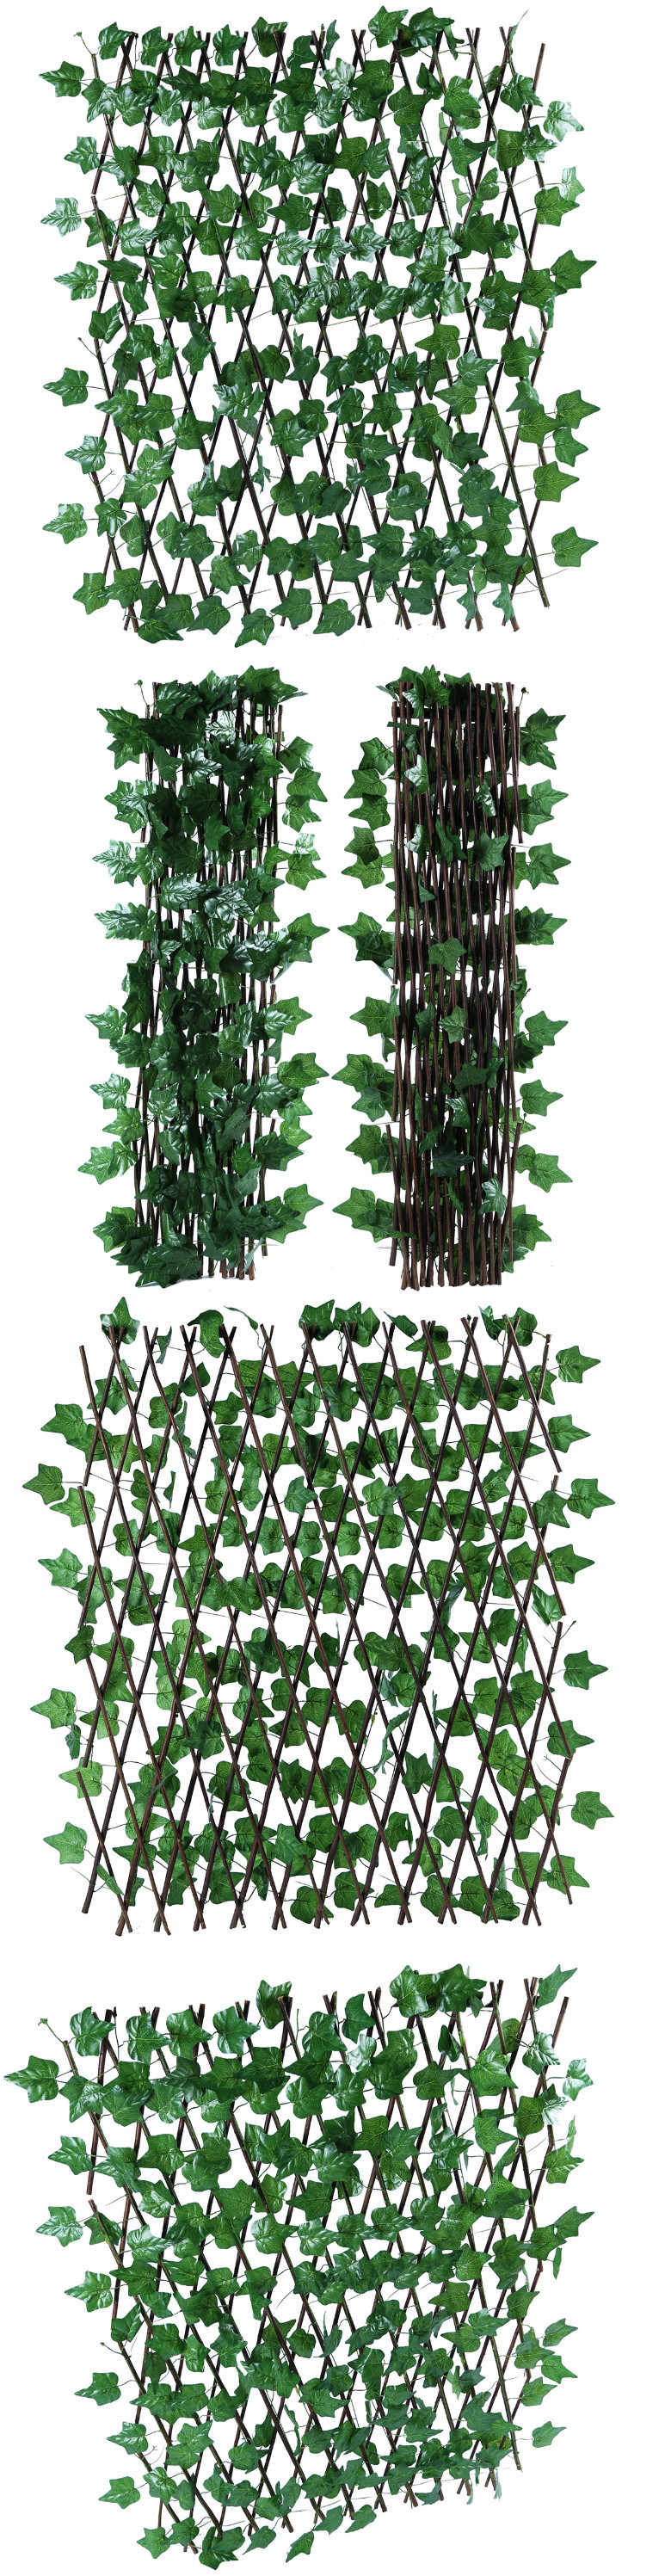 Artificial Leaf Fence Foldable Fence with Leaves